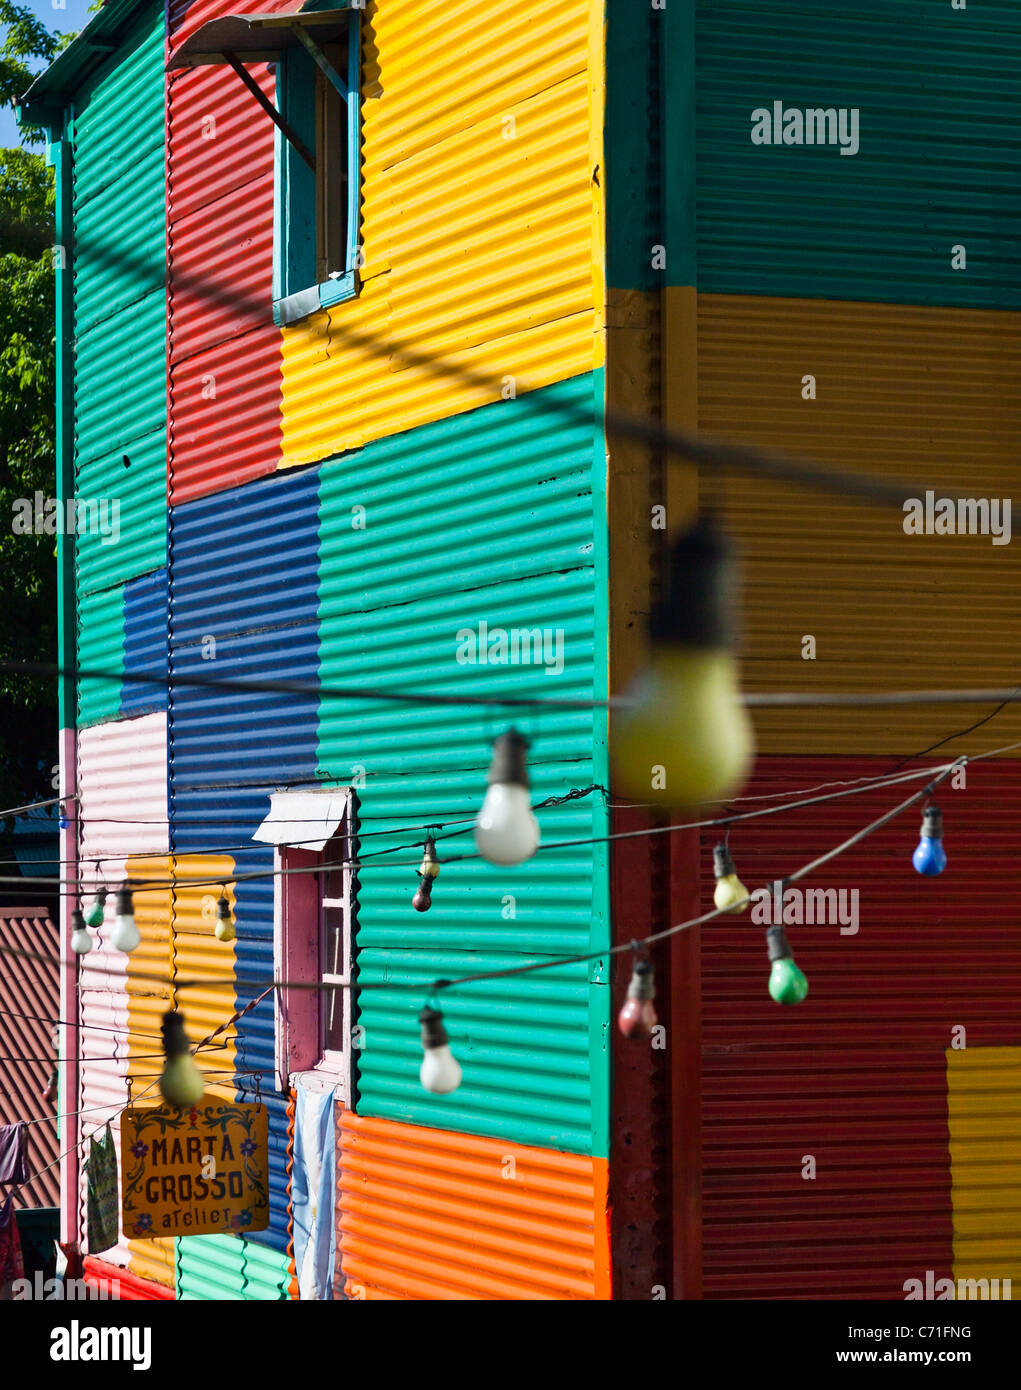 Colorful painted walls in the La Boca district of Buenos Aires, Argentina Stock Photo